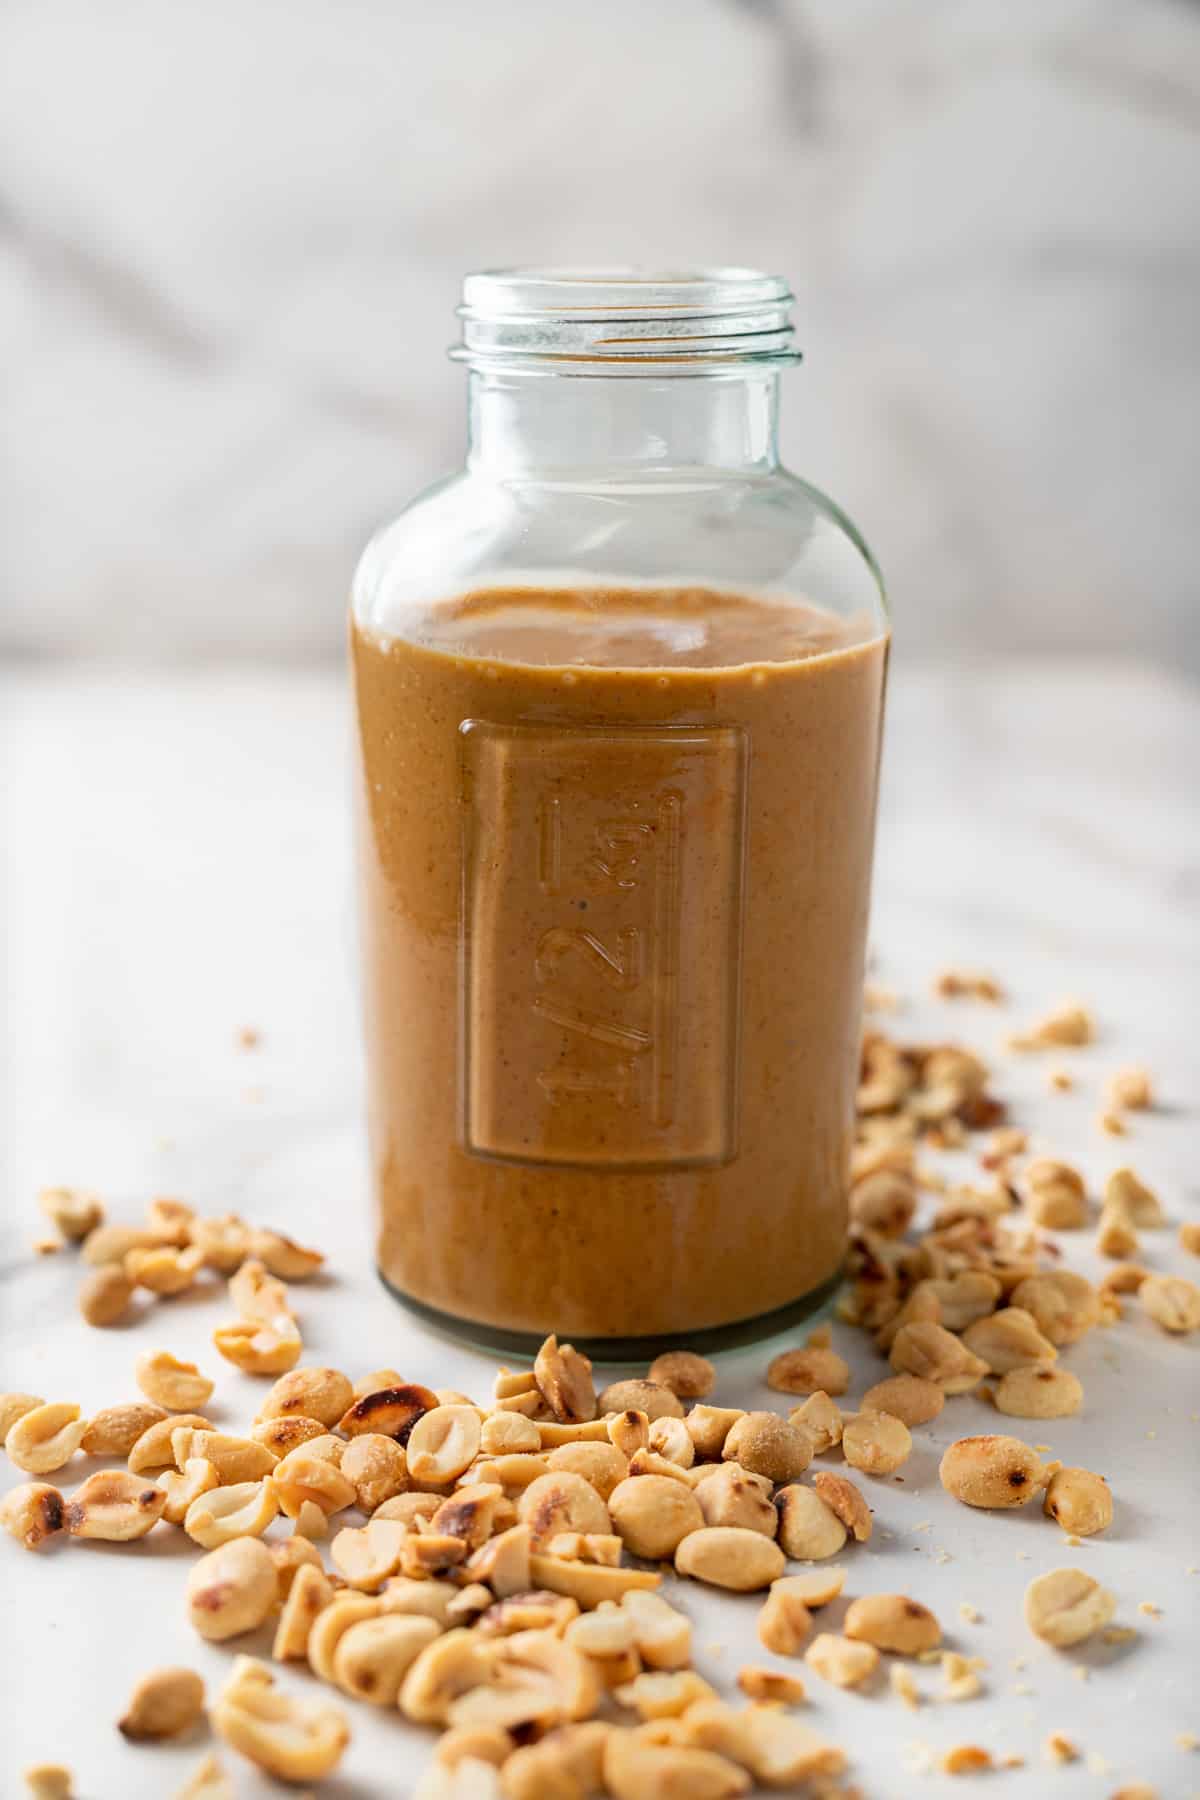 Jar of peanut sauce surrounded by a scattering of roasted peanuts.